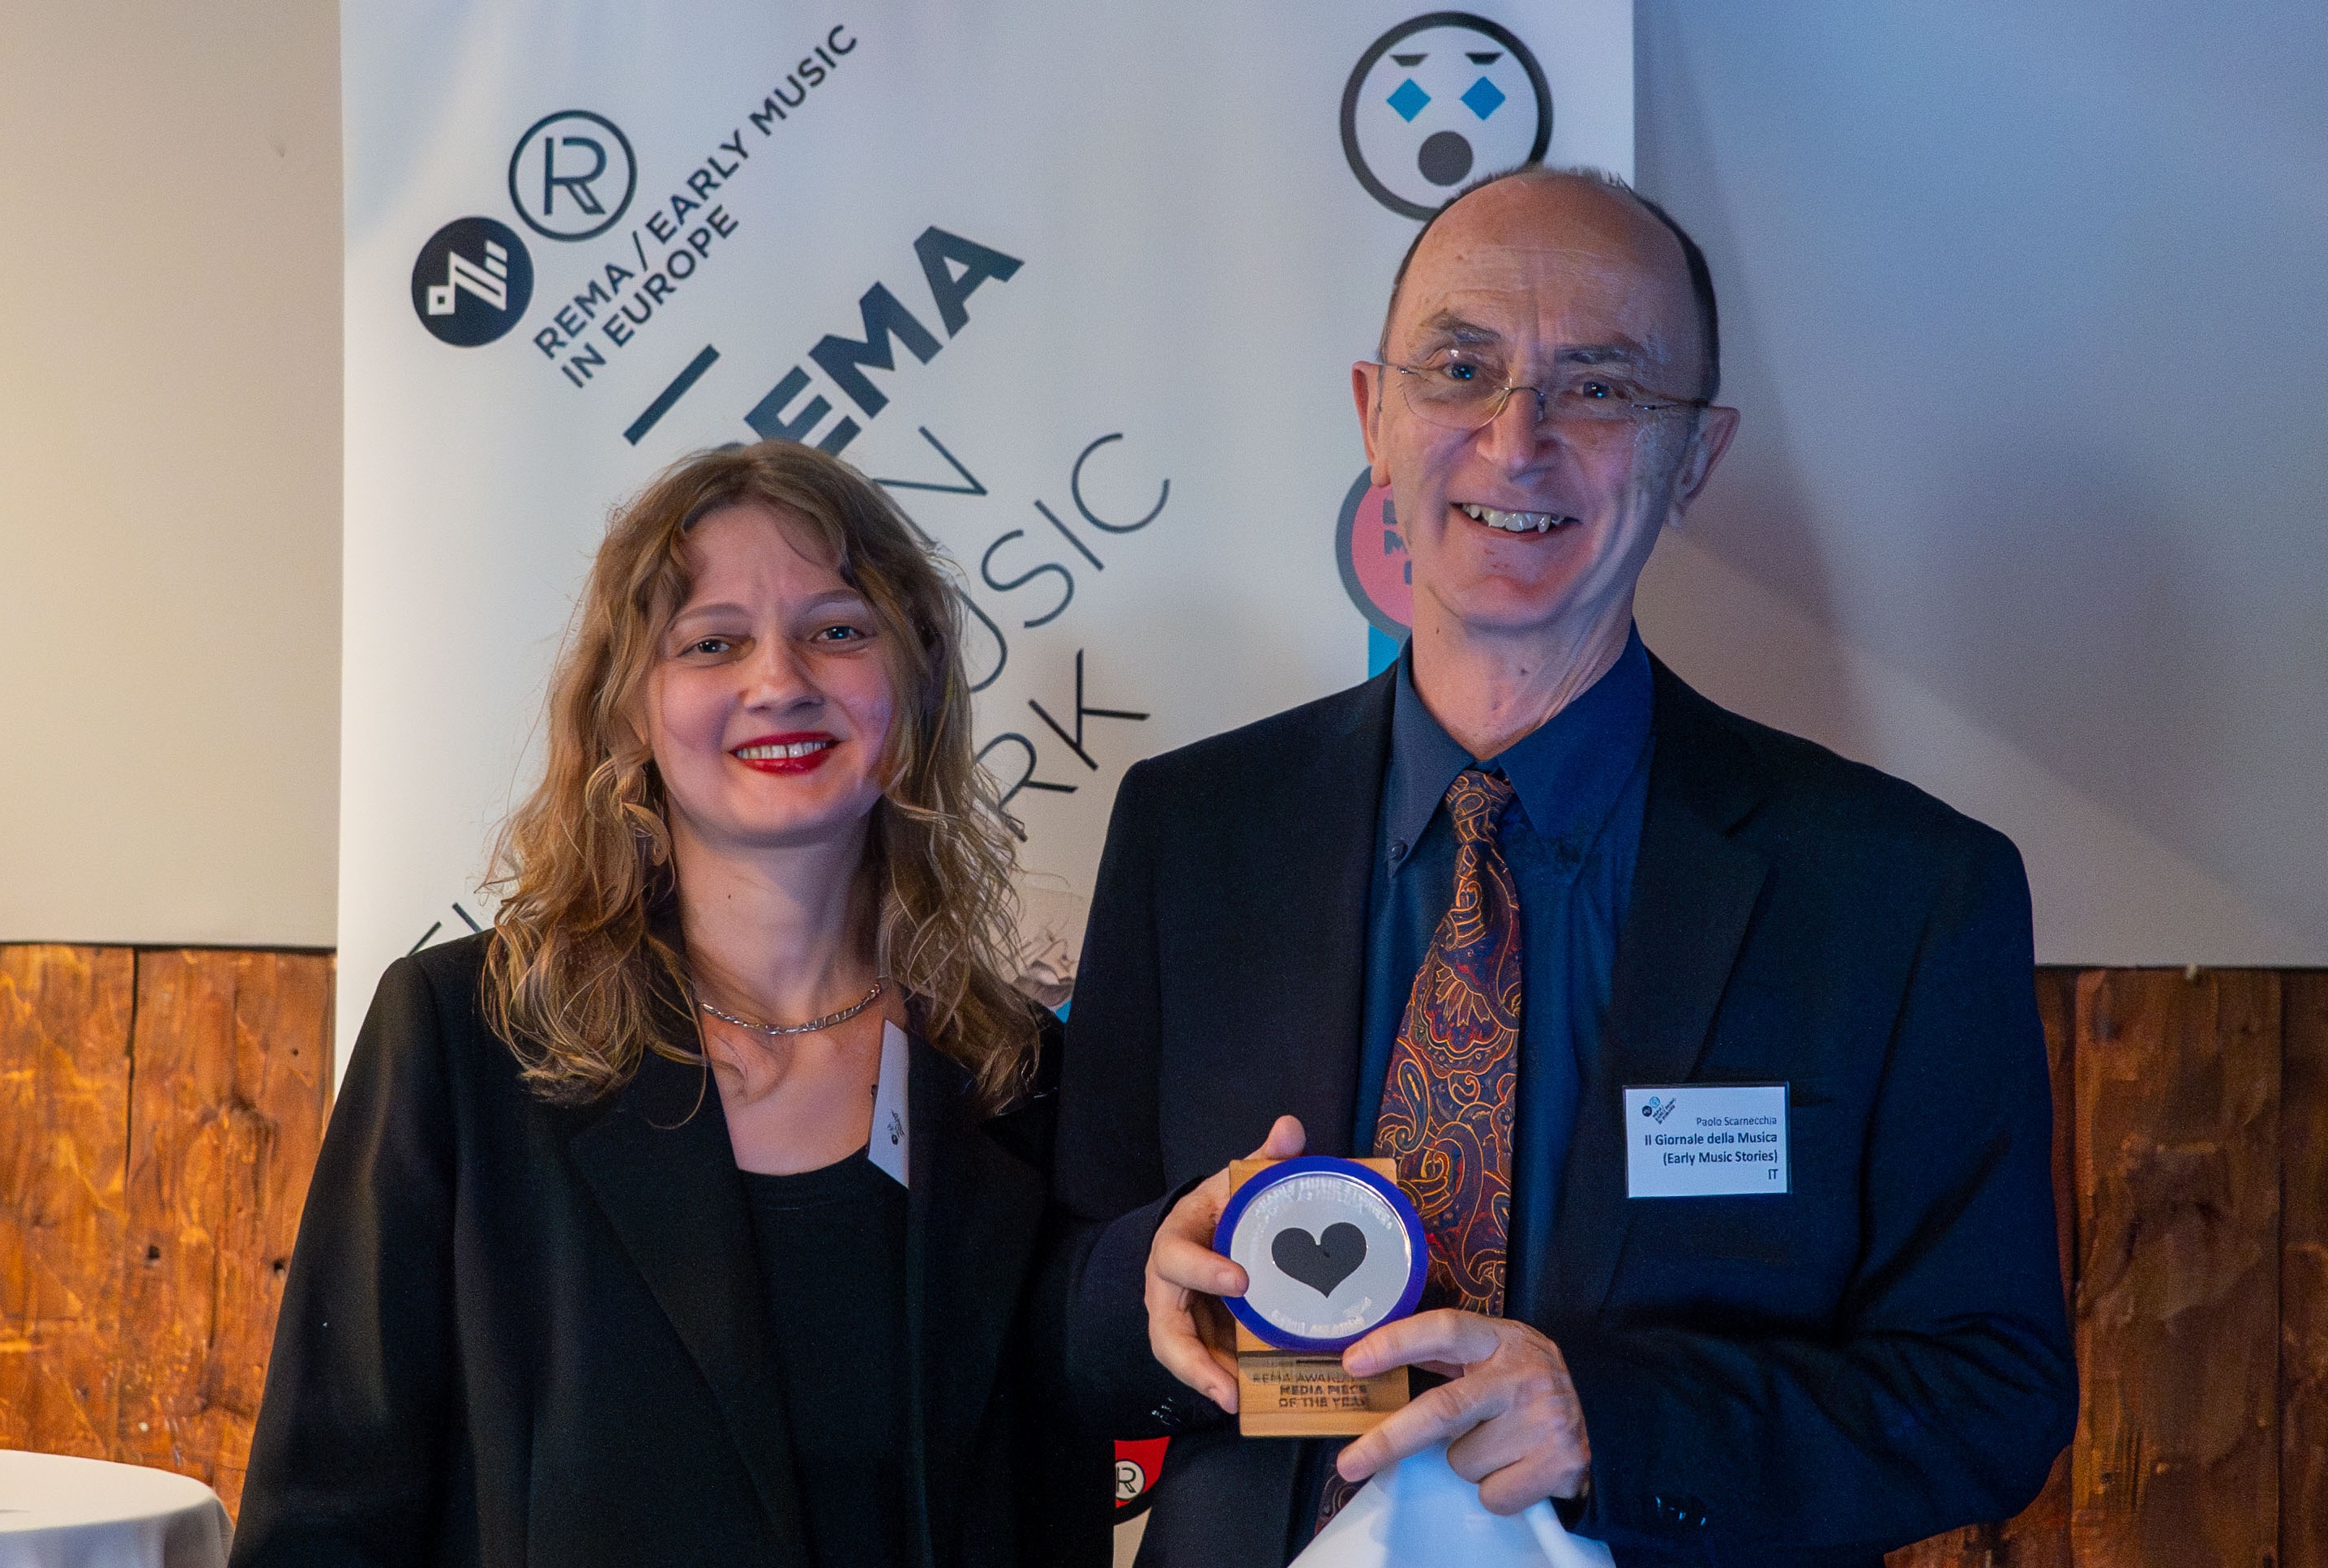 REMA Award Media piece of the year to Paolo Scarnecchia for Early Music Stories Podcast